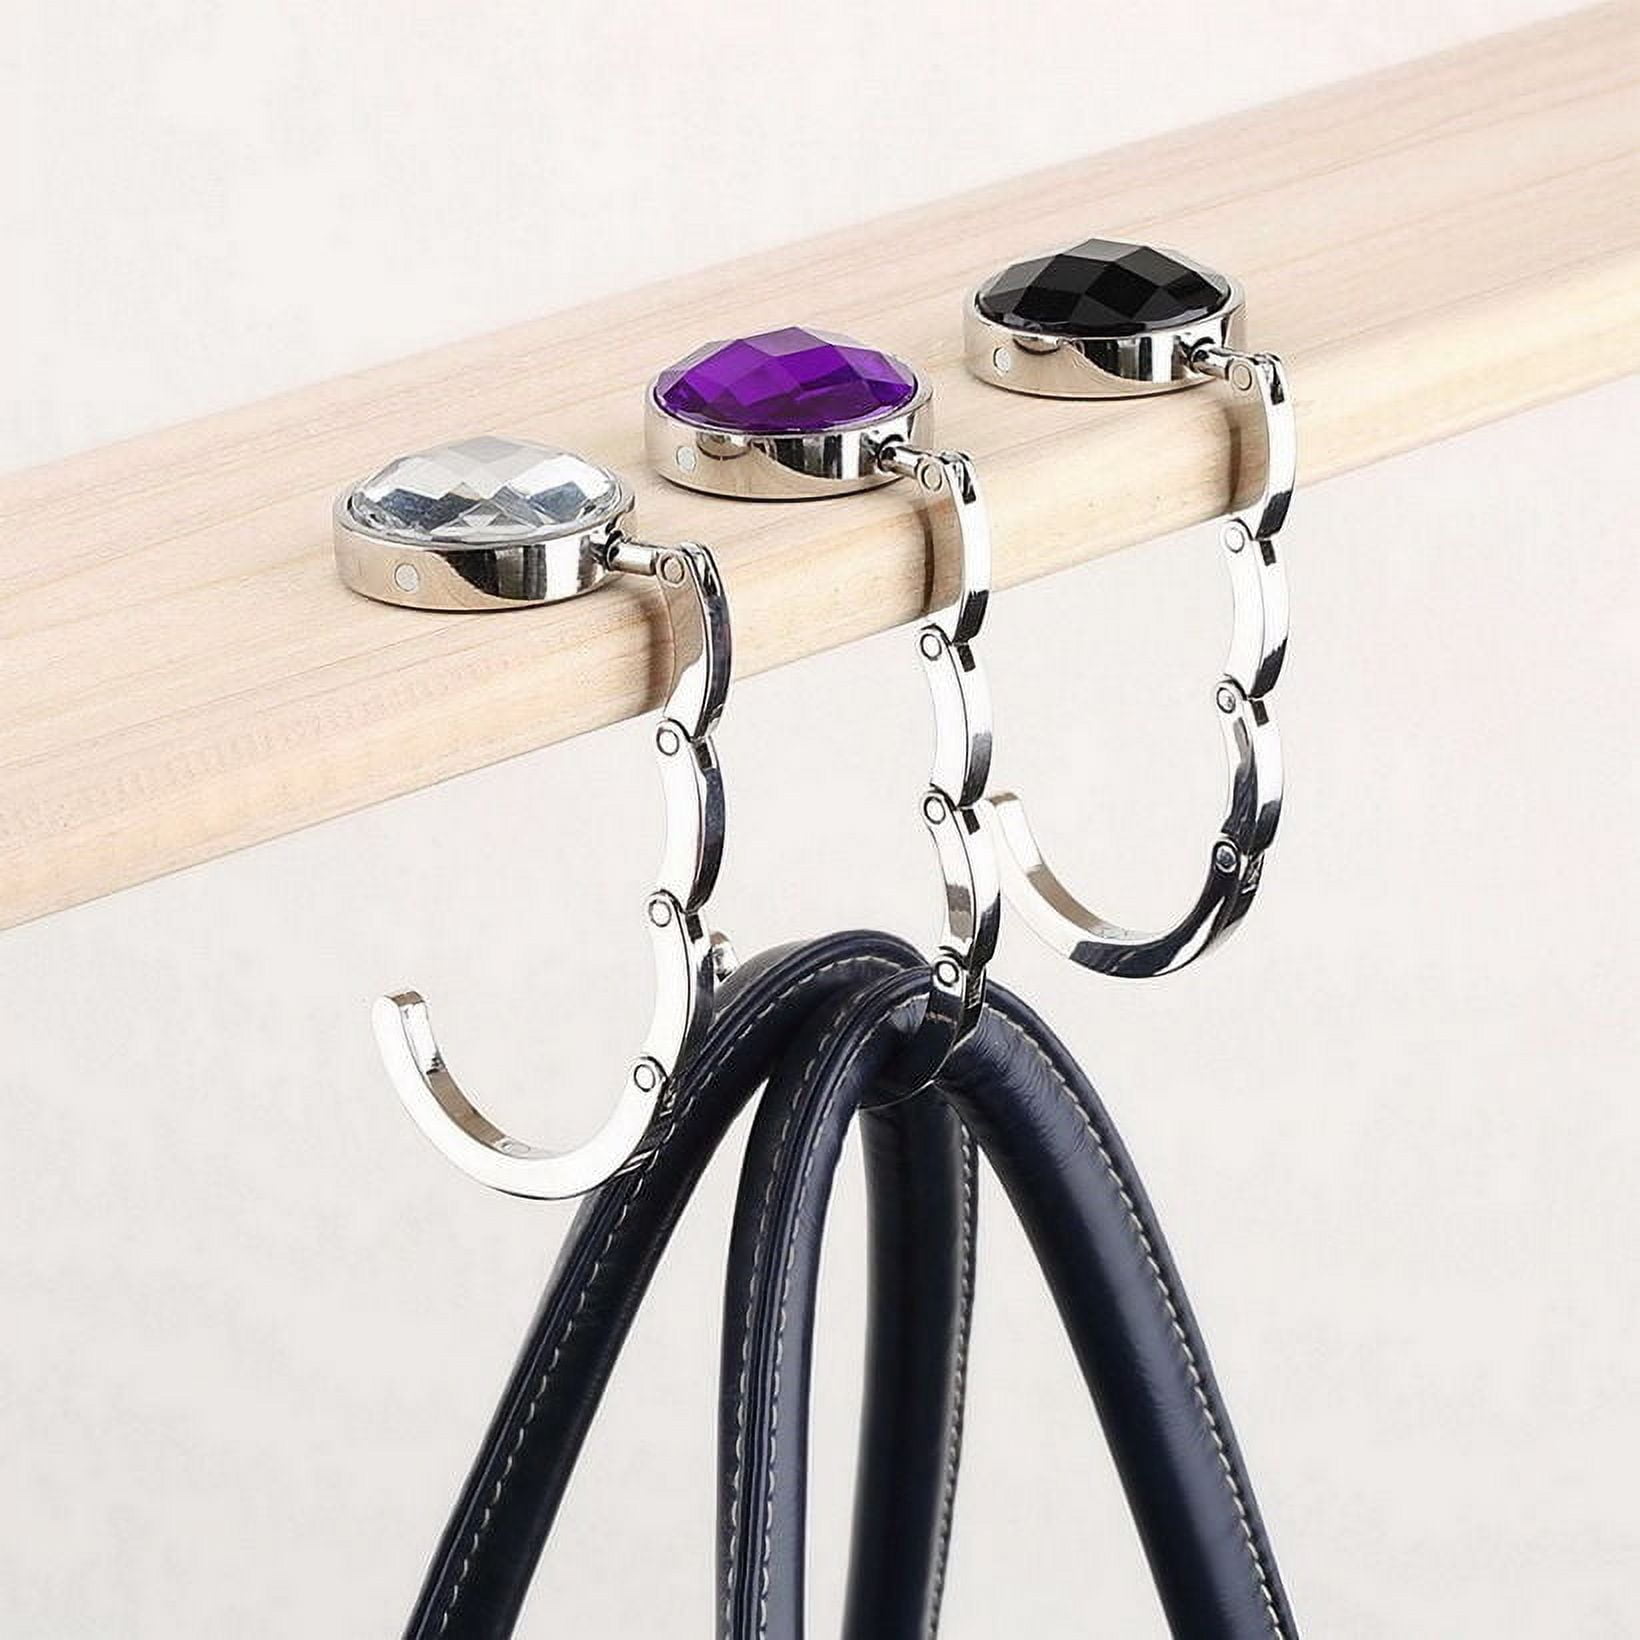 Foldable Purse Hanger Company Hook Durable Handbag Holder For Tote And Home  Decor From Cftde, $23.09 | DHgate.Com